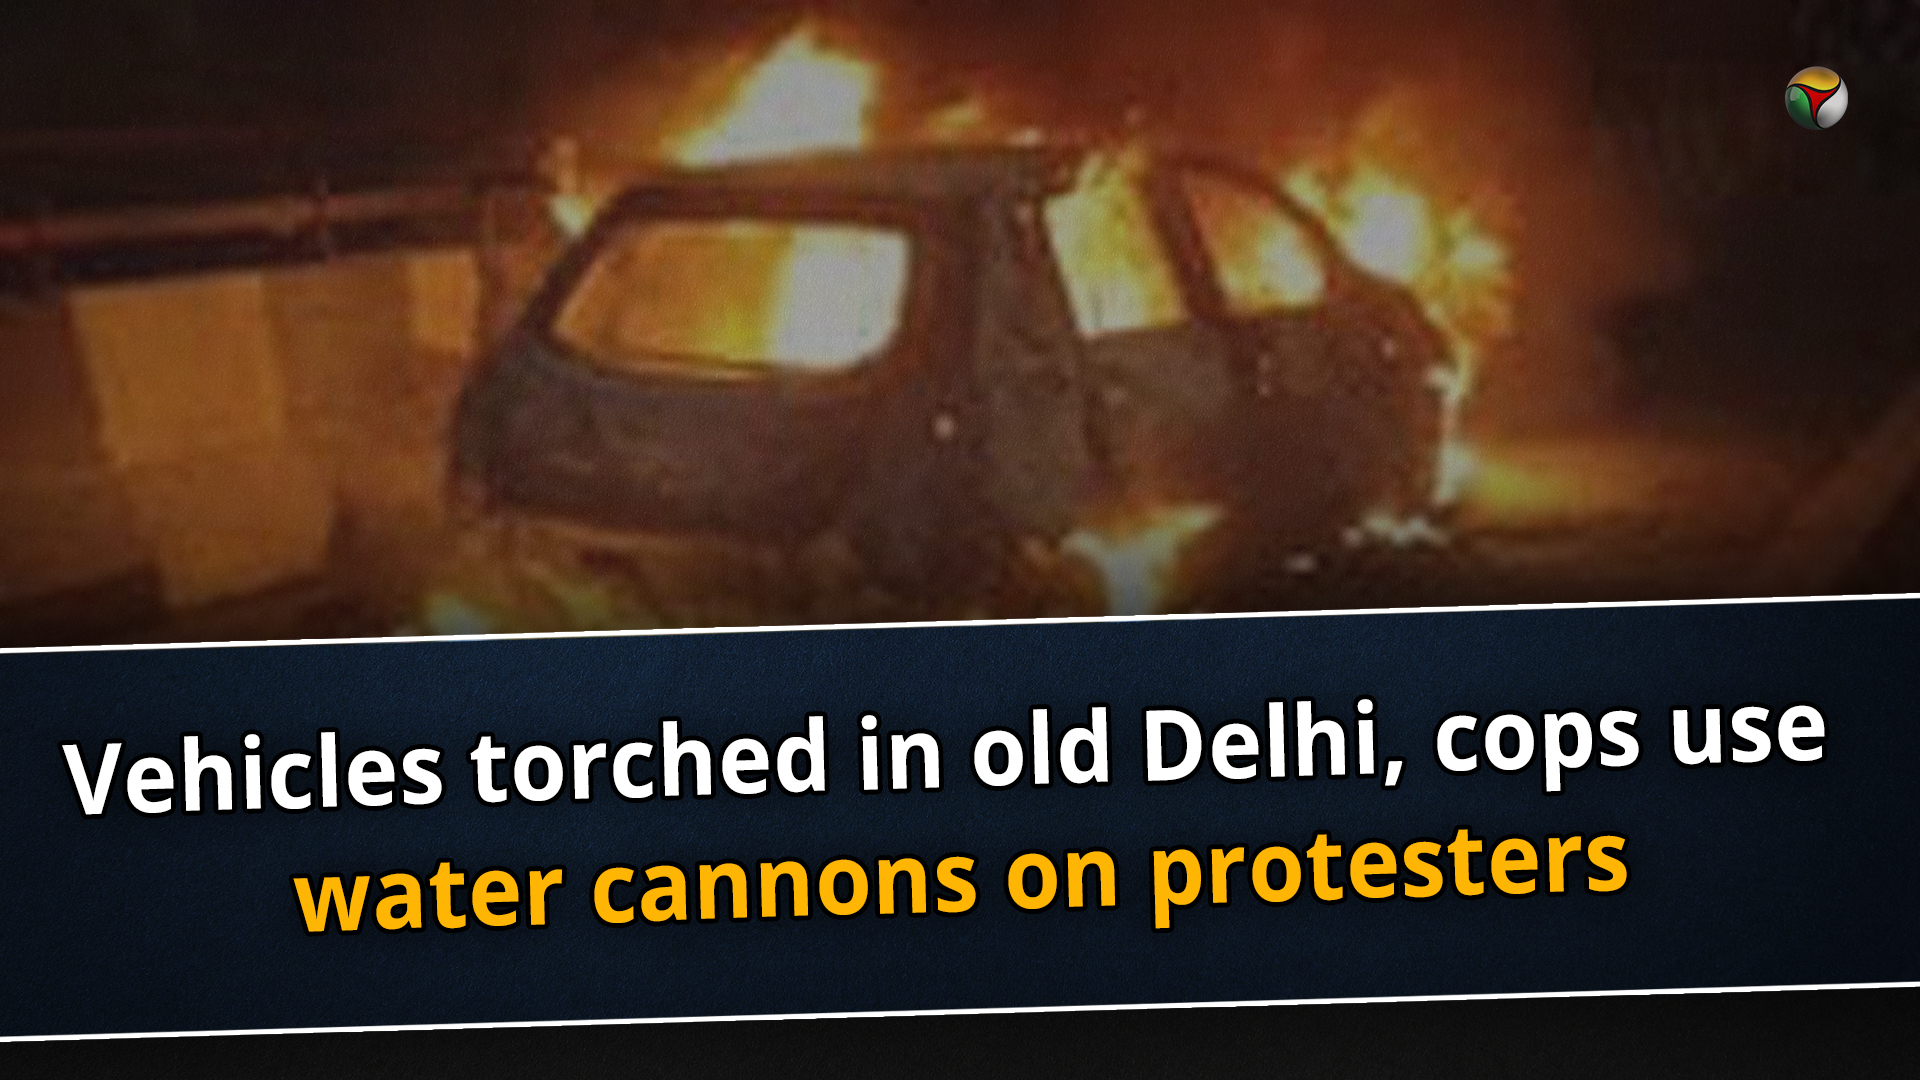 Vehicles torched in old Delhi, cops use water cannons on protesters